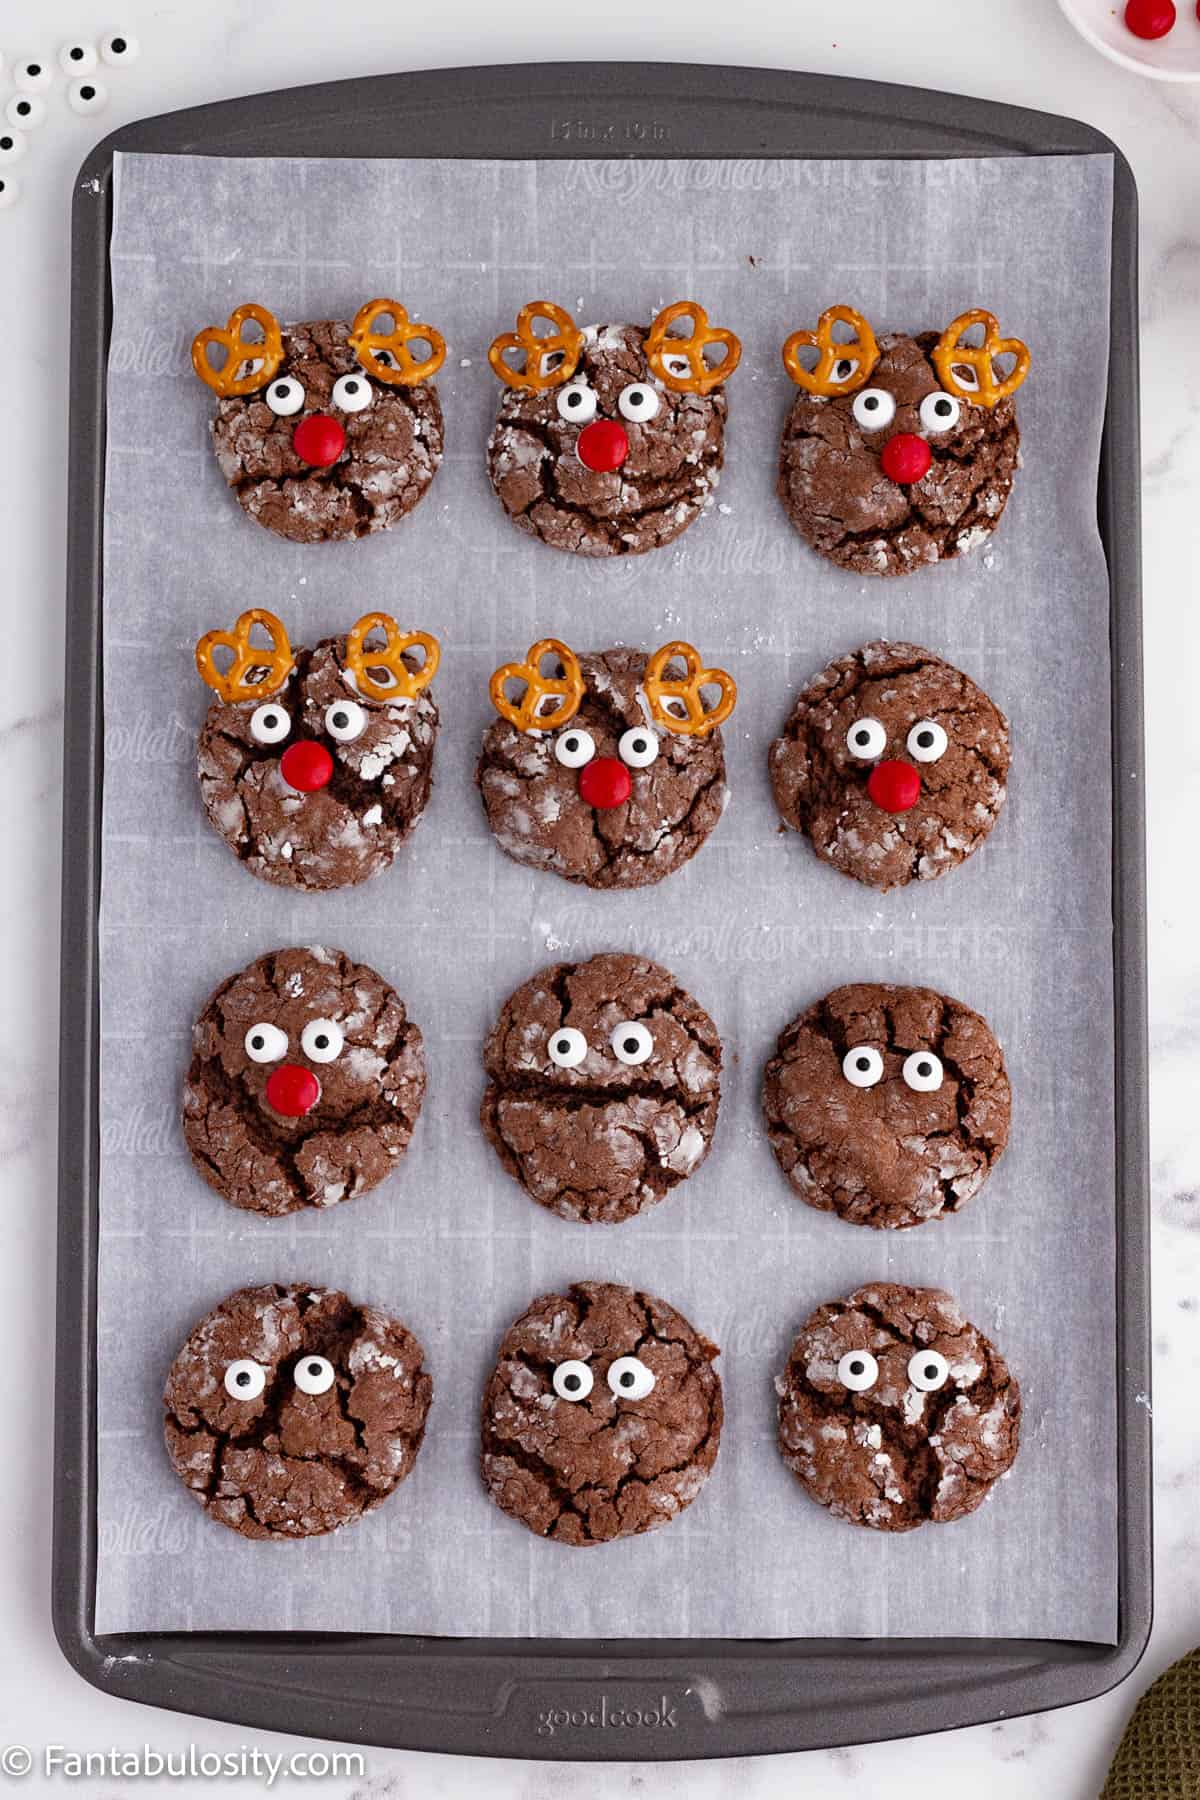 A metal baking sheet lined with parchment paper holds 12 round chocolate cookies in various stages of being decorated to look like reindeer